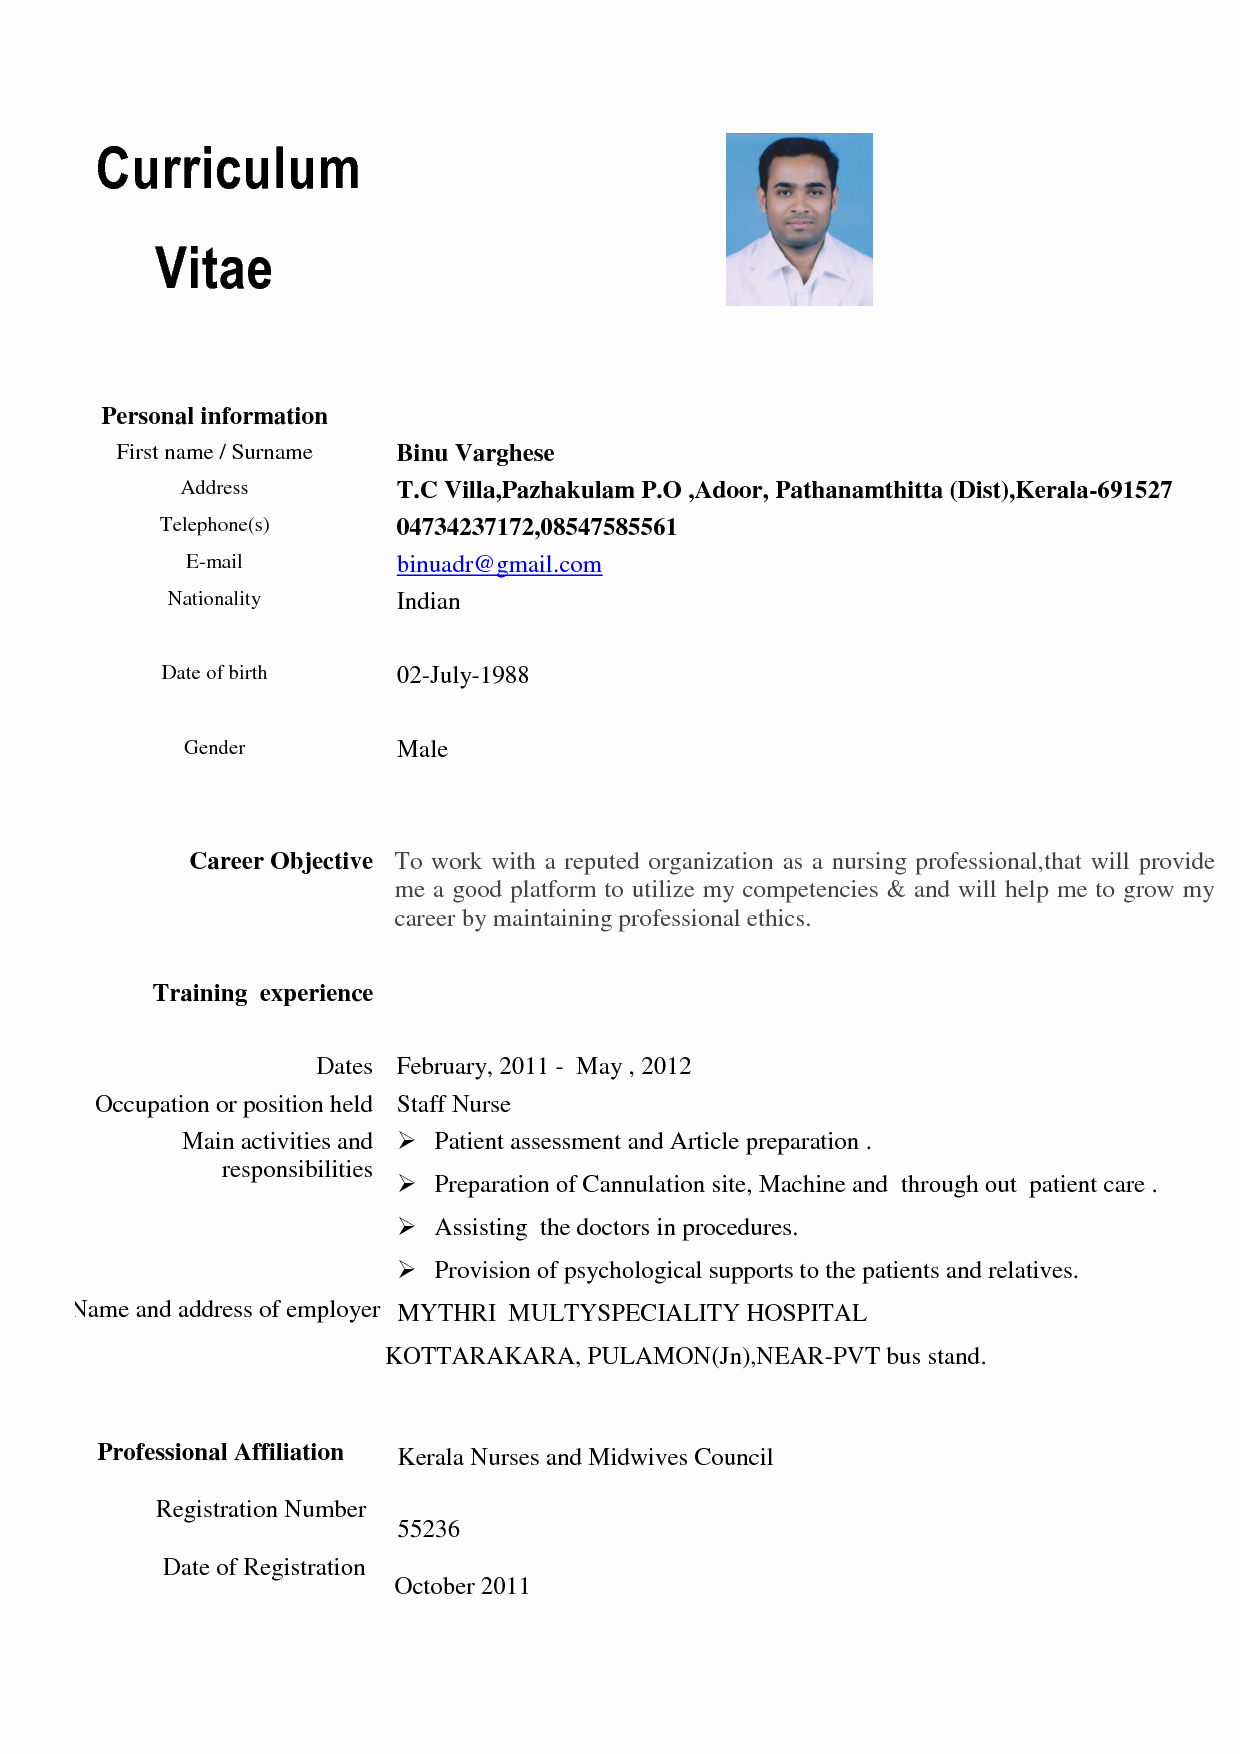 Curriculum Vitae for Nurses Awesome Best S Of Curriculum Vitae Sample for Nurses